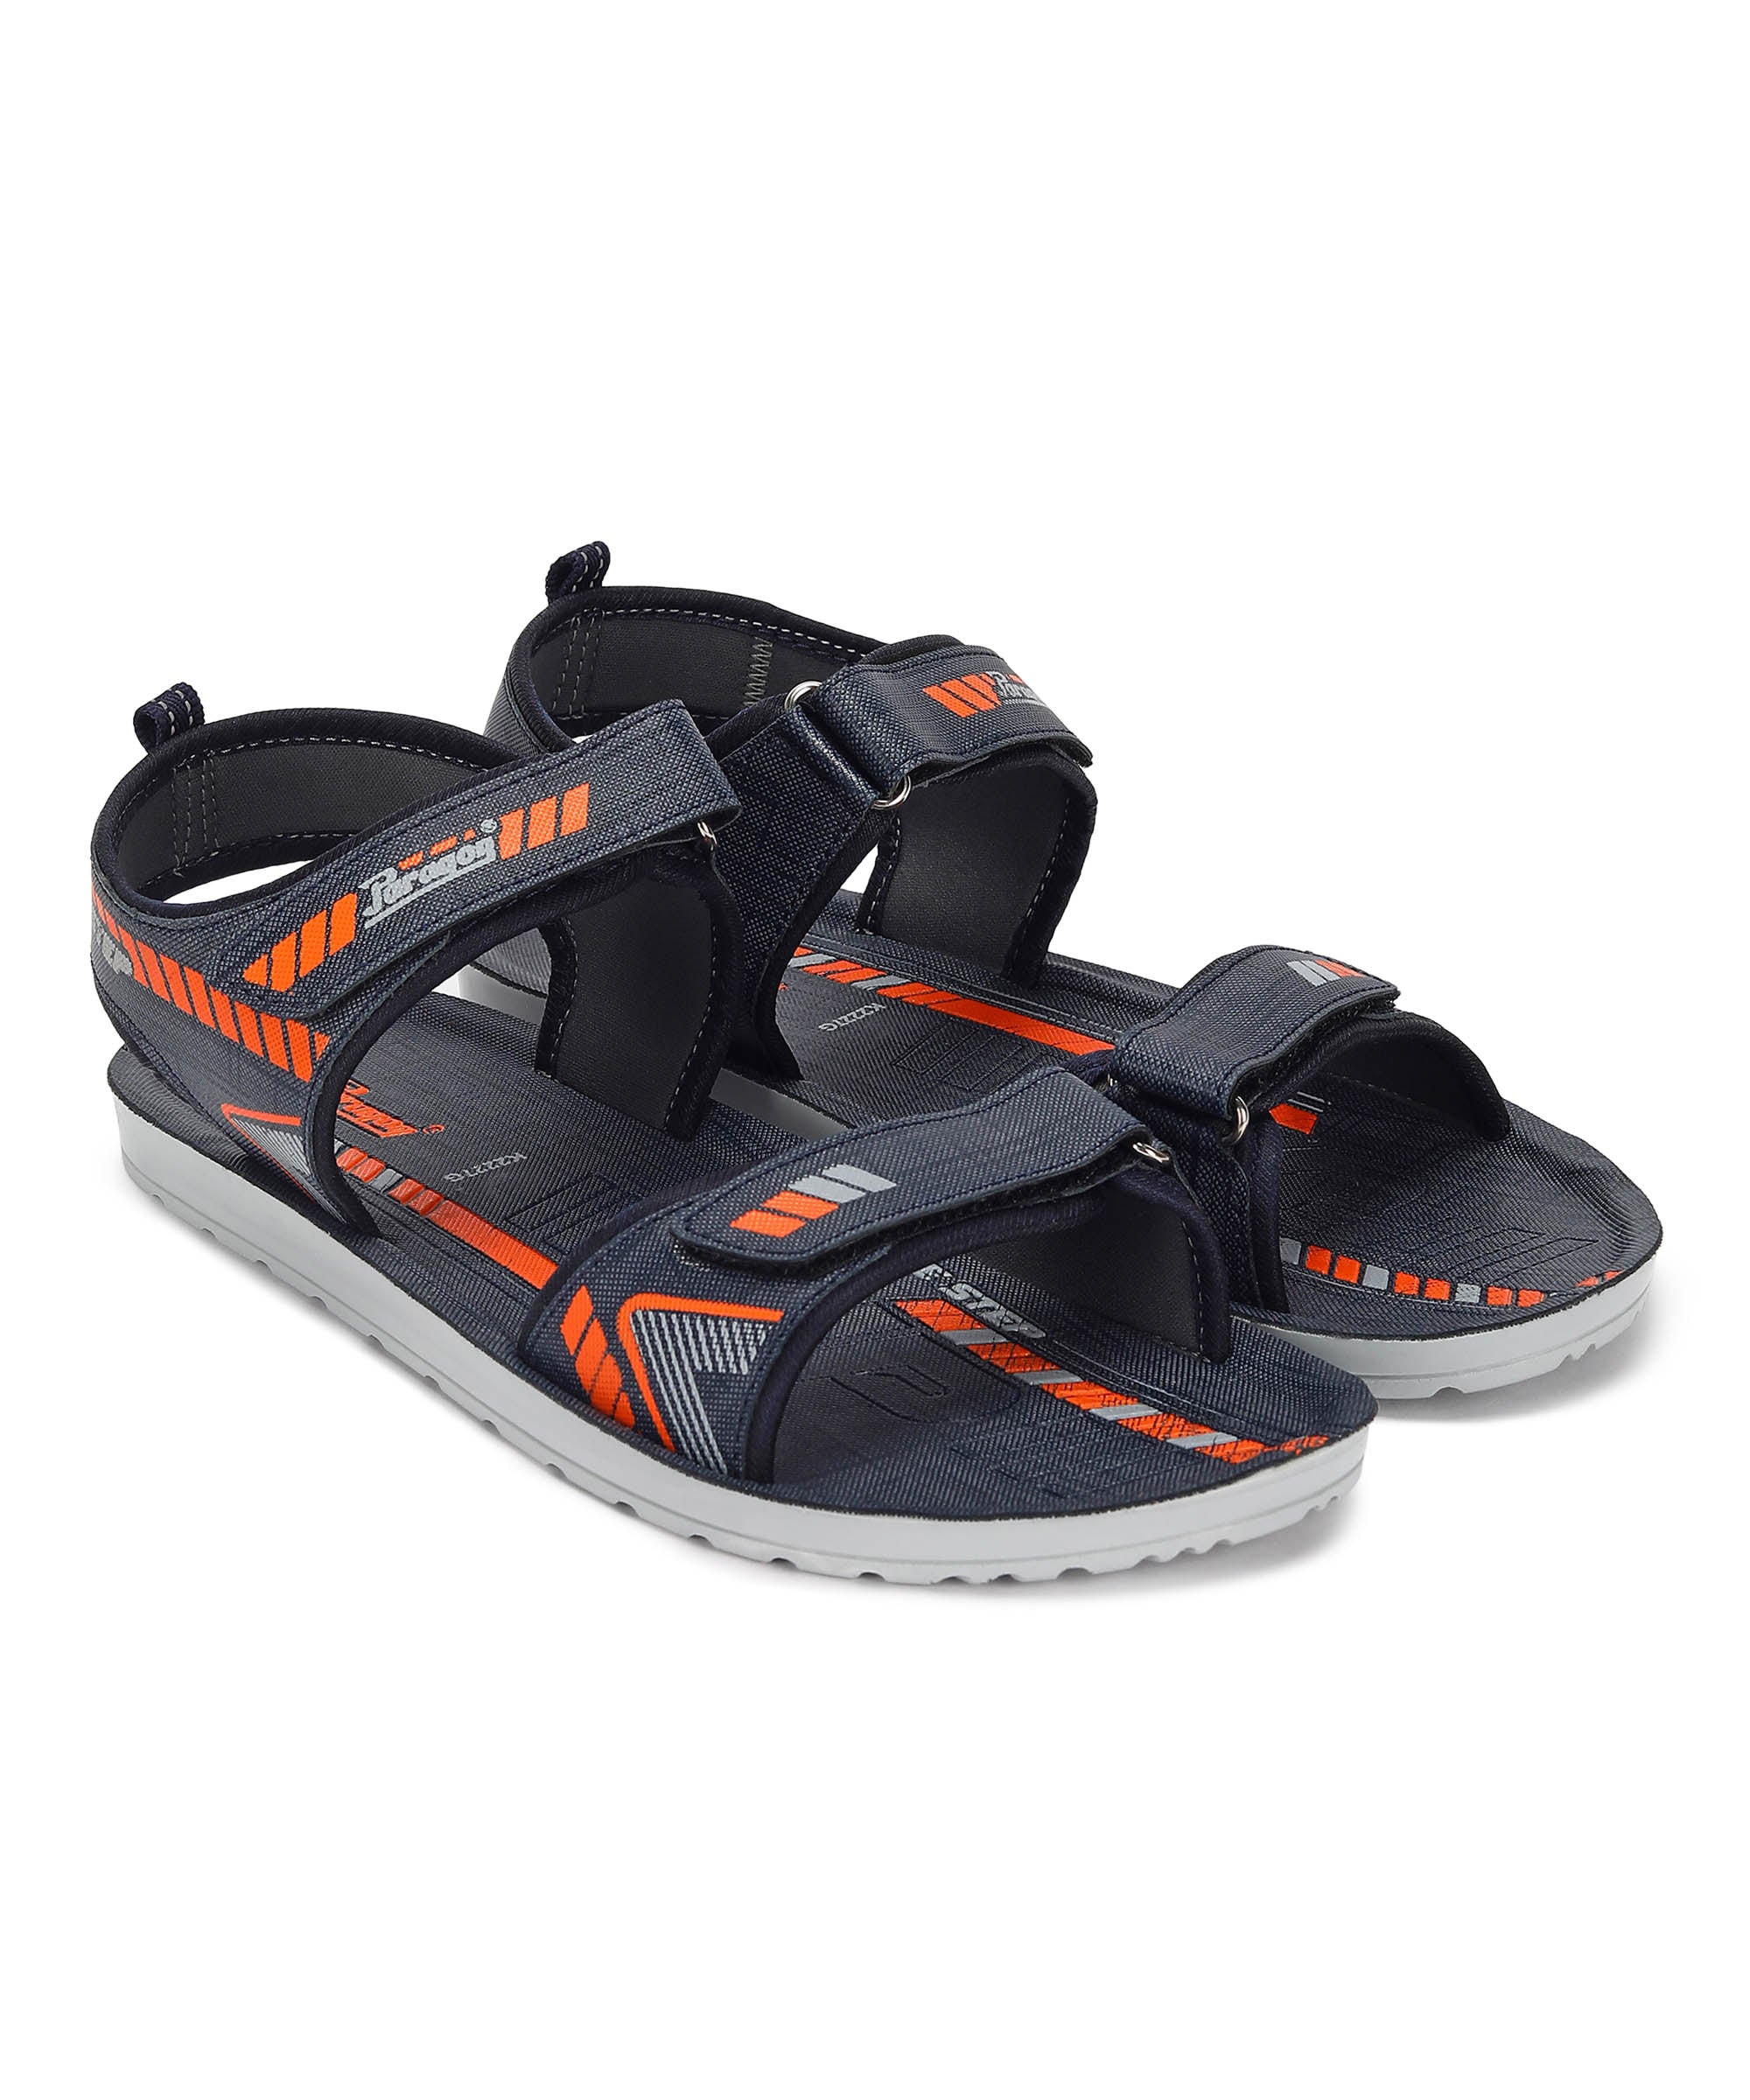 Paragon PUK2227G Men Stylish Sandals | Comfortable Sandals for Daily Outdoor Use | Casual Formal Sandals with Cushioned Soles